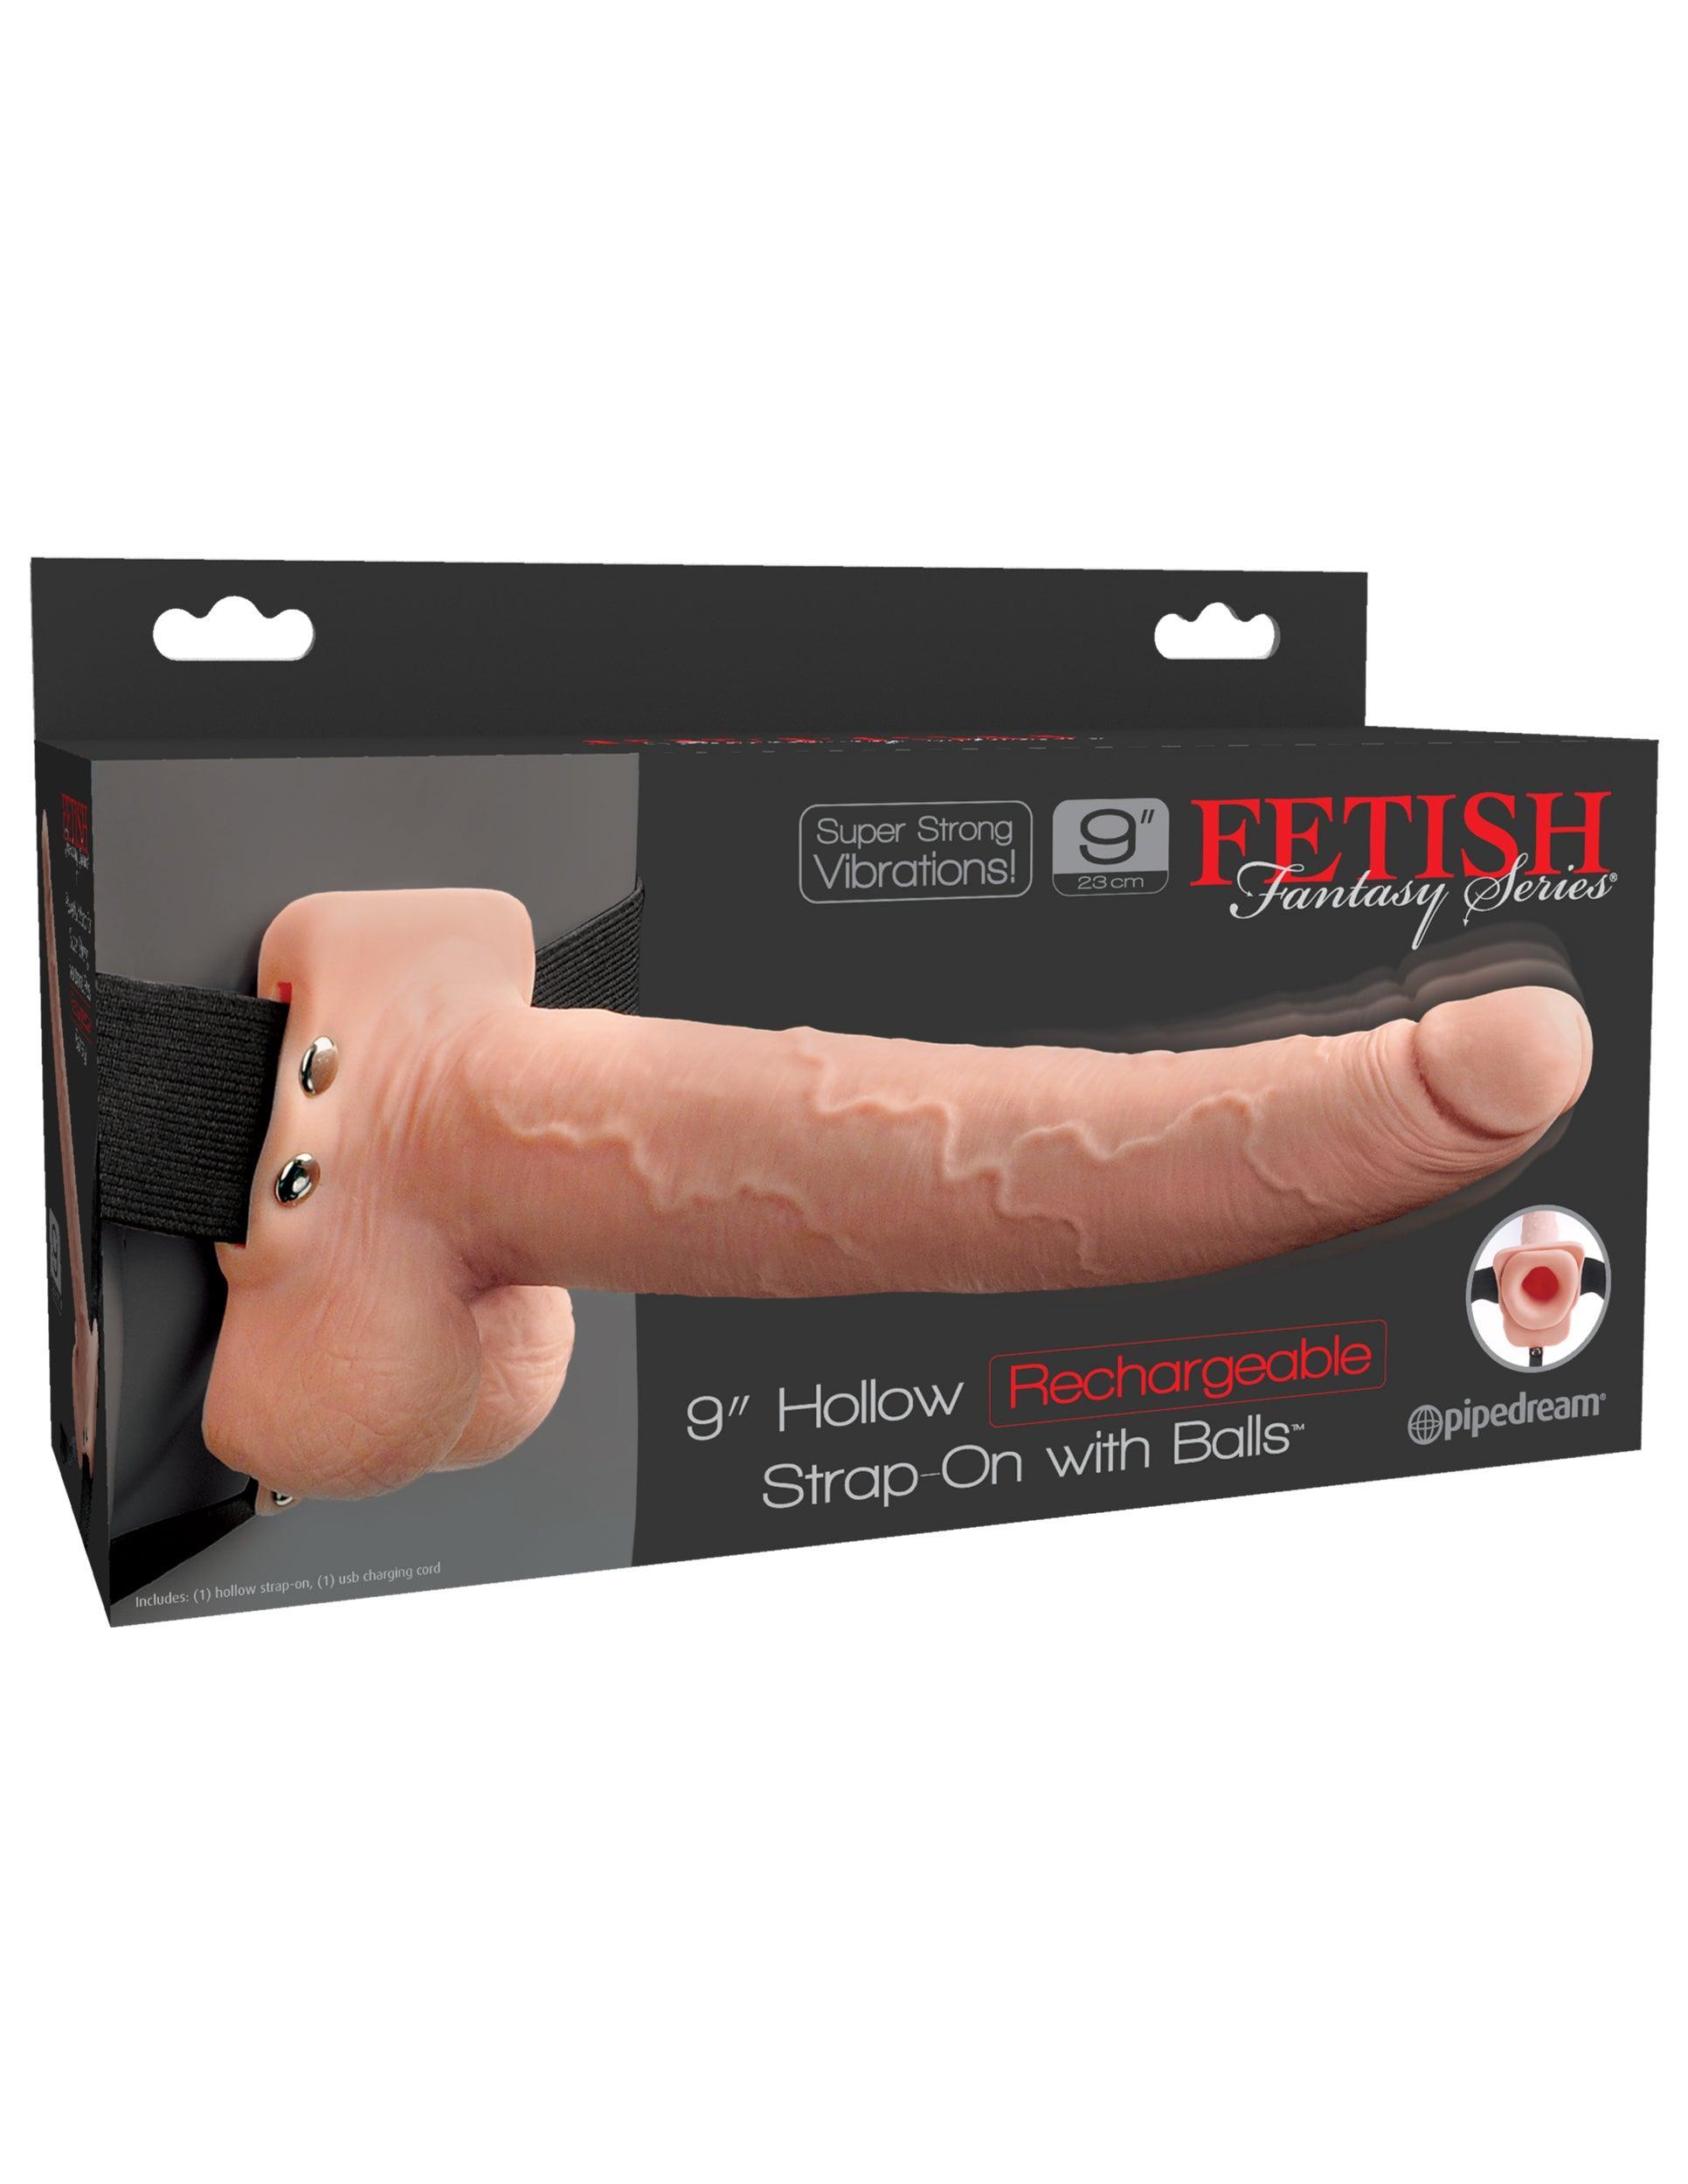 Fetish Fantasy Series 9 Inch Hollow Rechargeable Strap-on With Balls - Flesh - My Sex Toy Hub